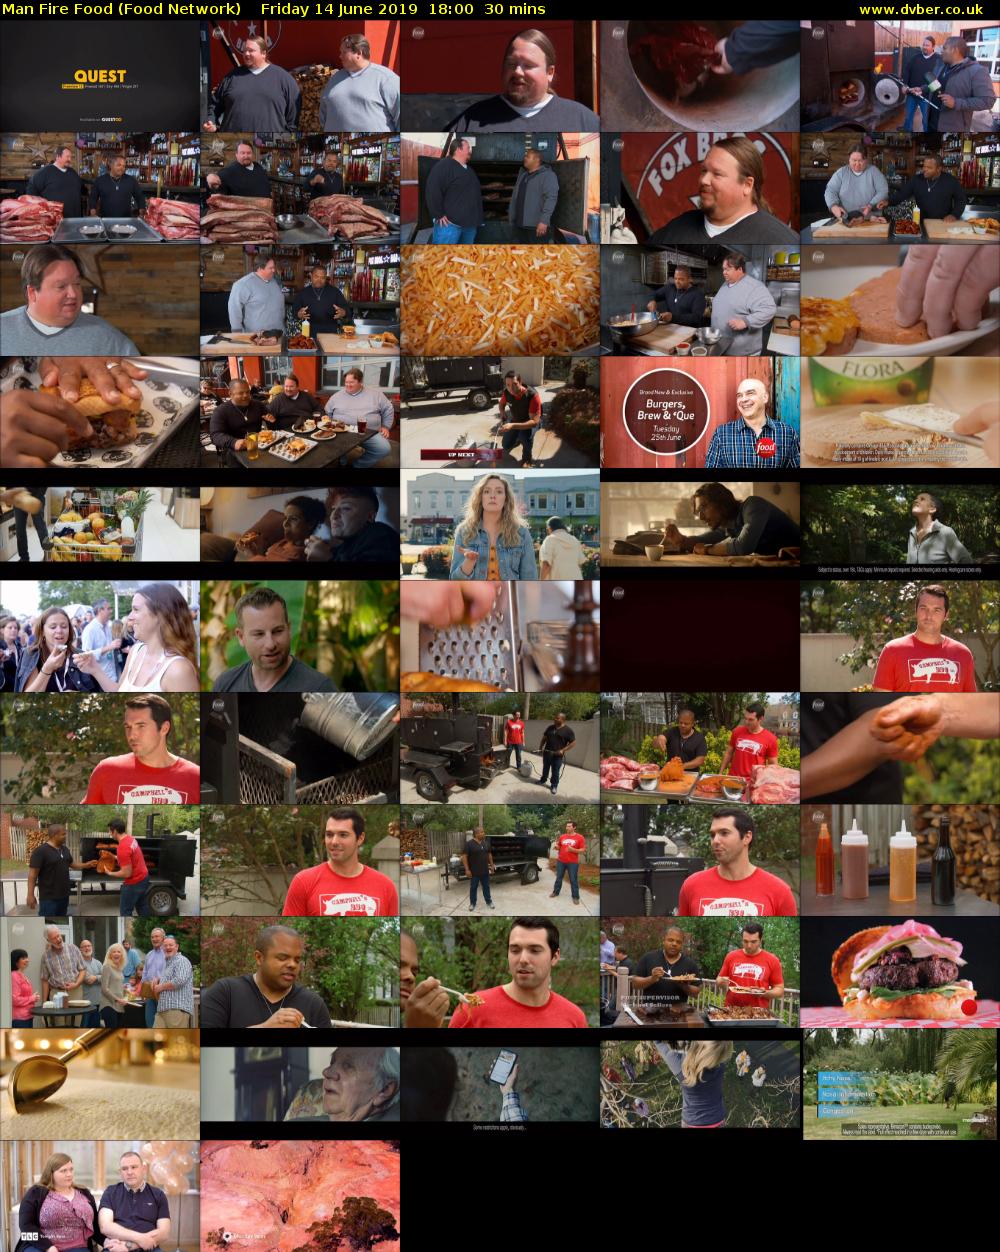 Man Fire Food (Food Network) Friday 14 June 2019 18:00 - 18:30